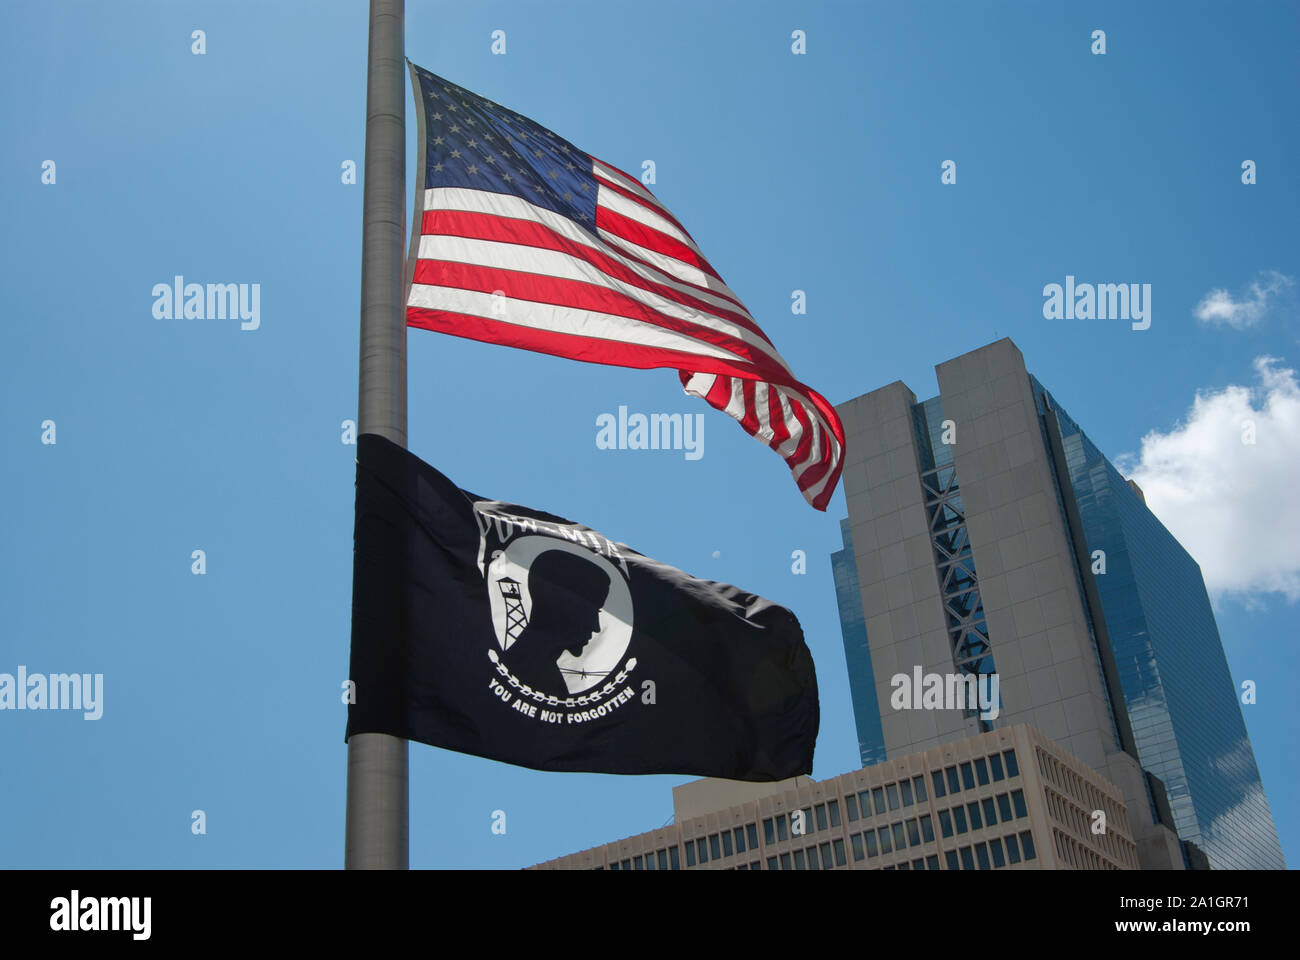 American and POW/MIA flags raised in Downtown Miami on Flagler street in recognition of POW day (Sep 20th) Stock Photo